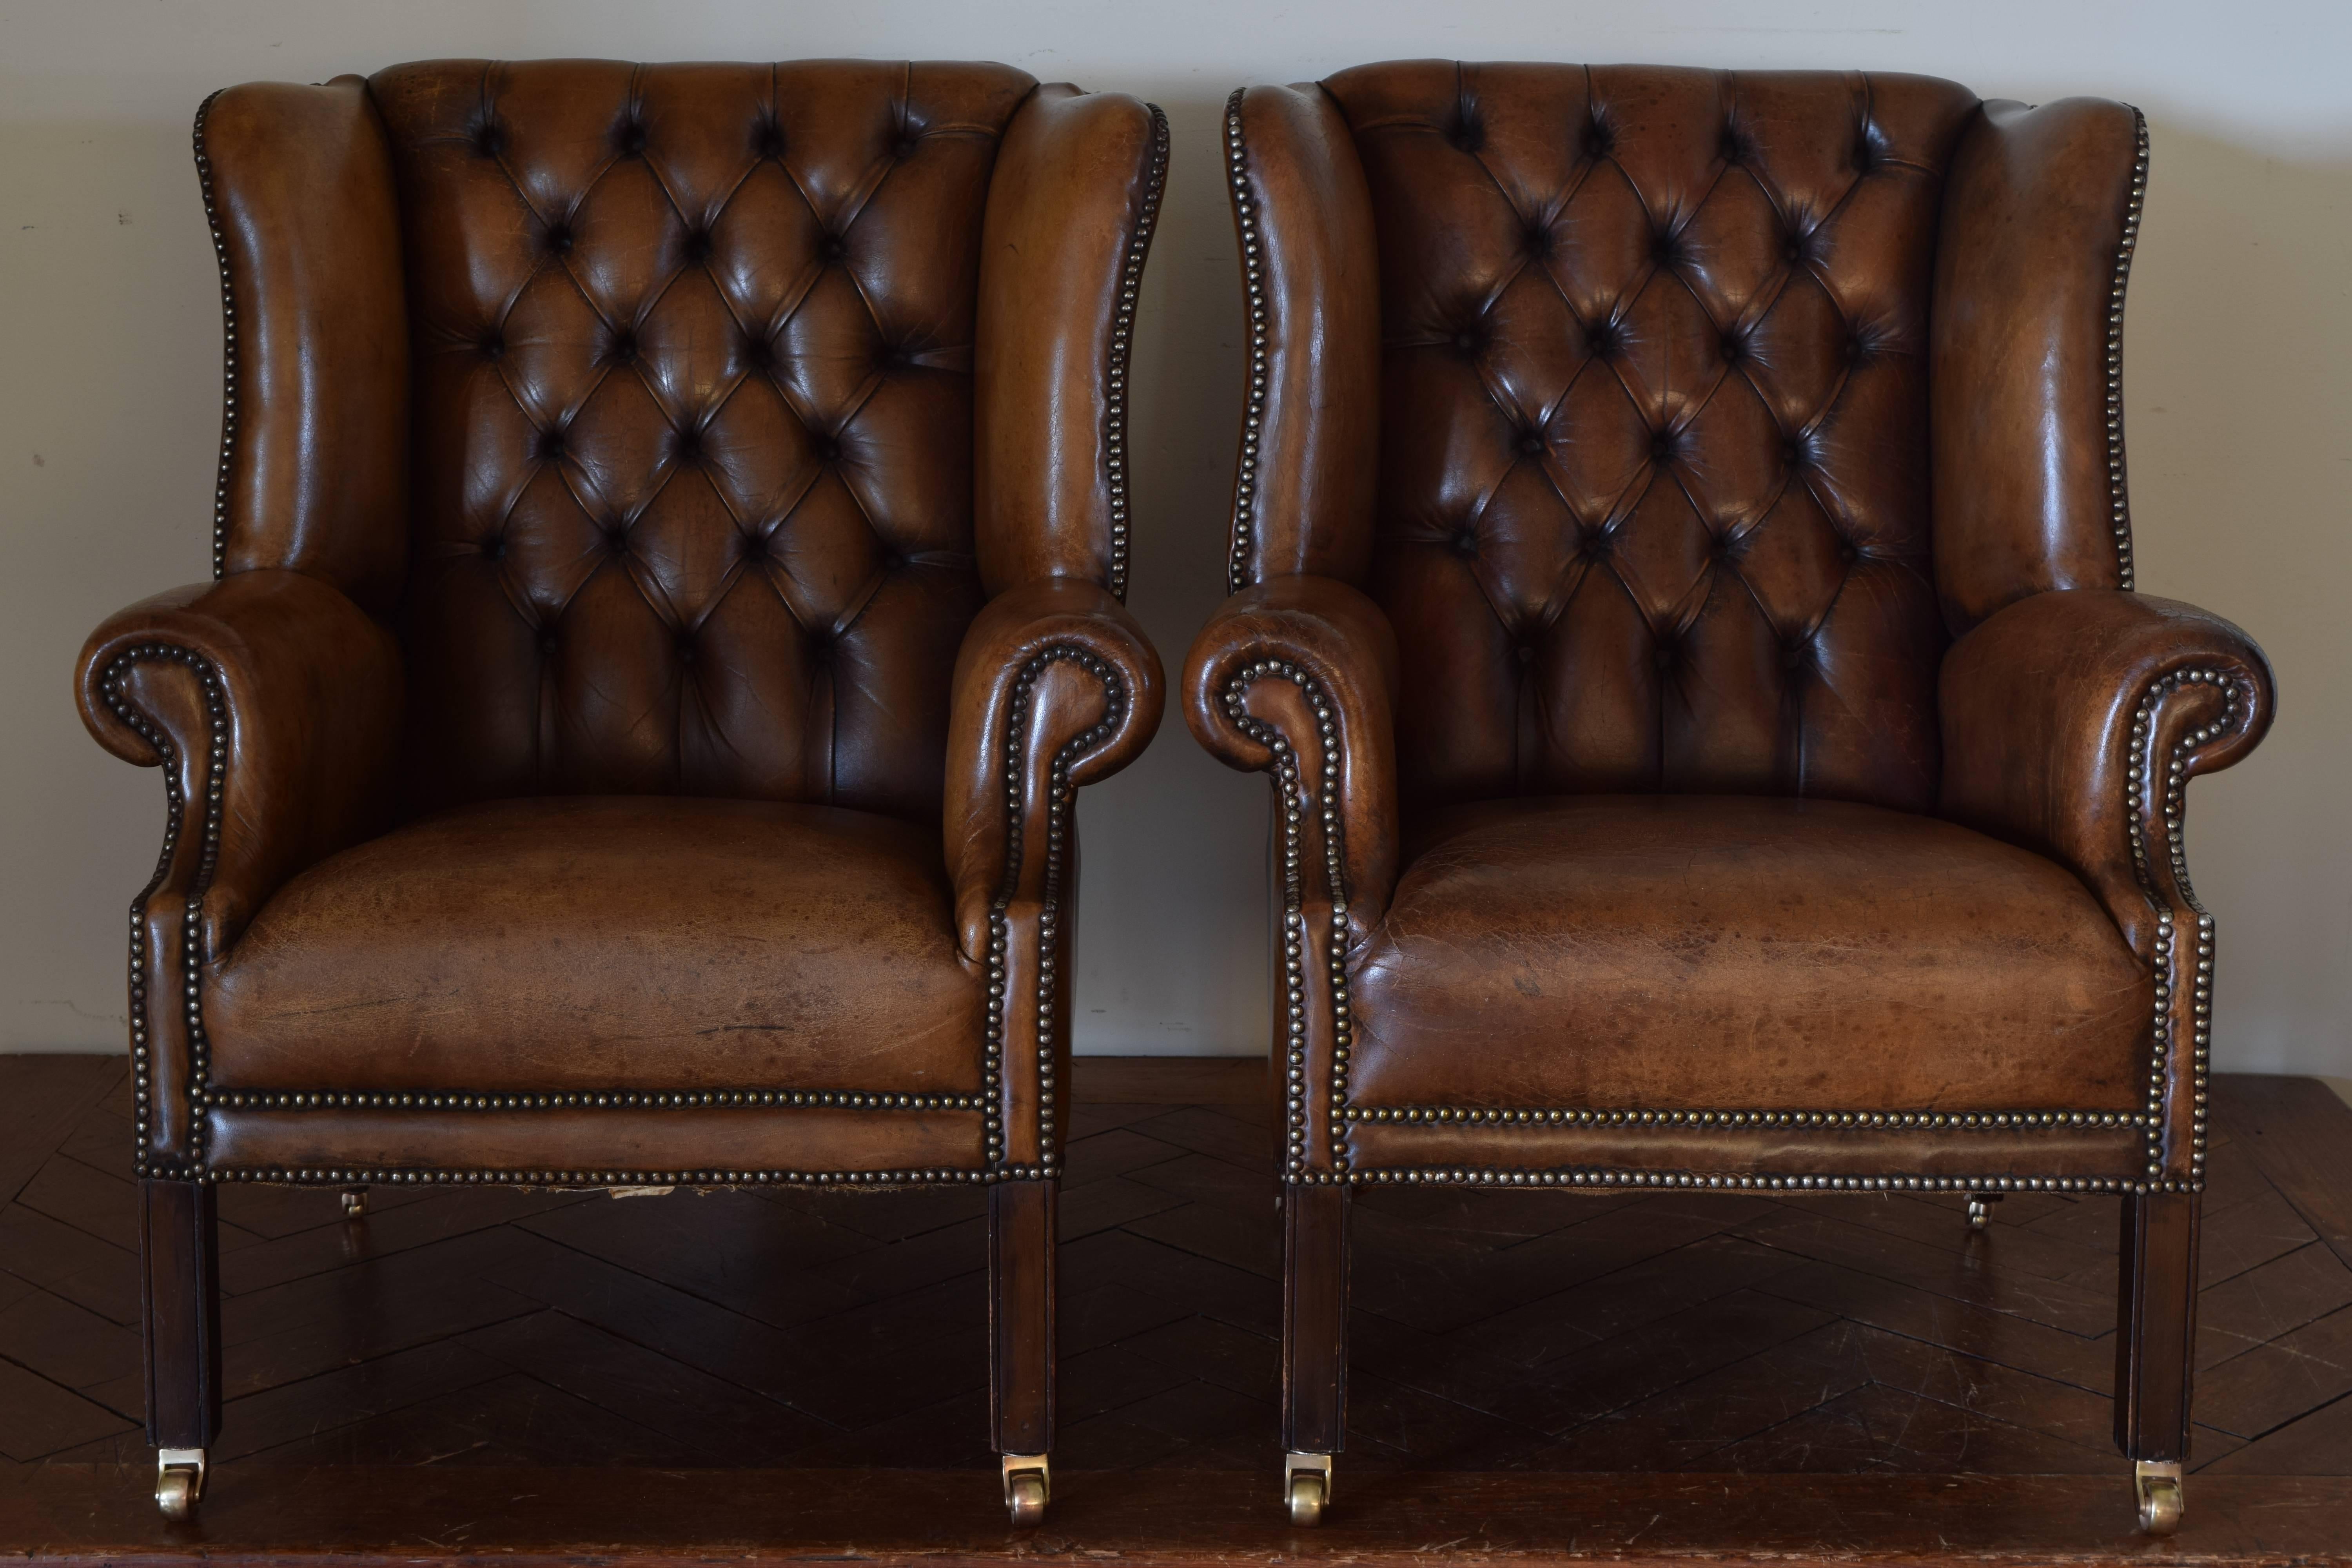 Raised on mahogany legs with brass wheels, upholstered in leather with tufted backrests.